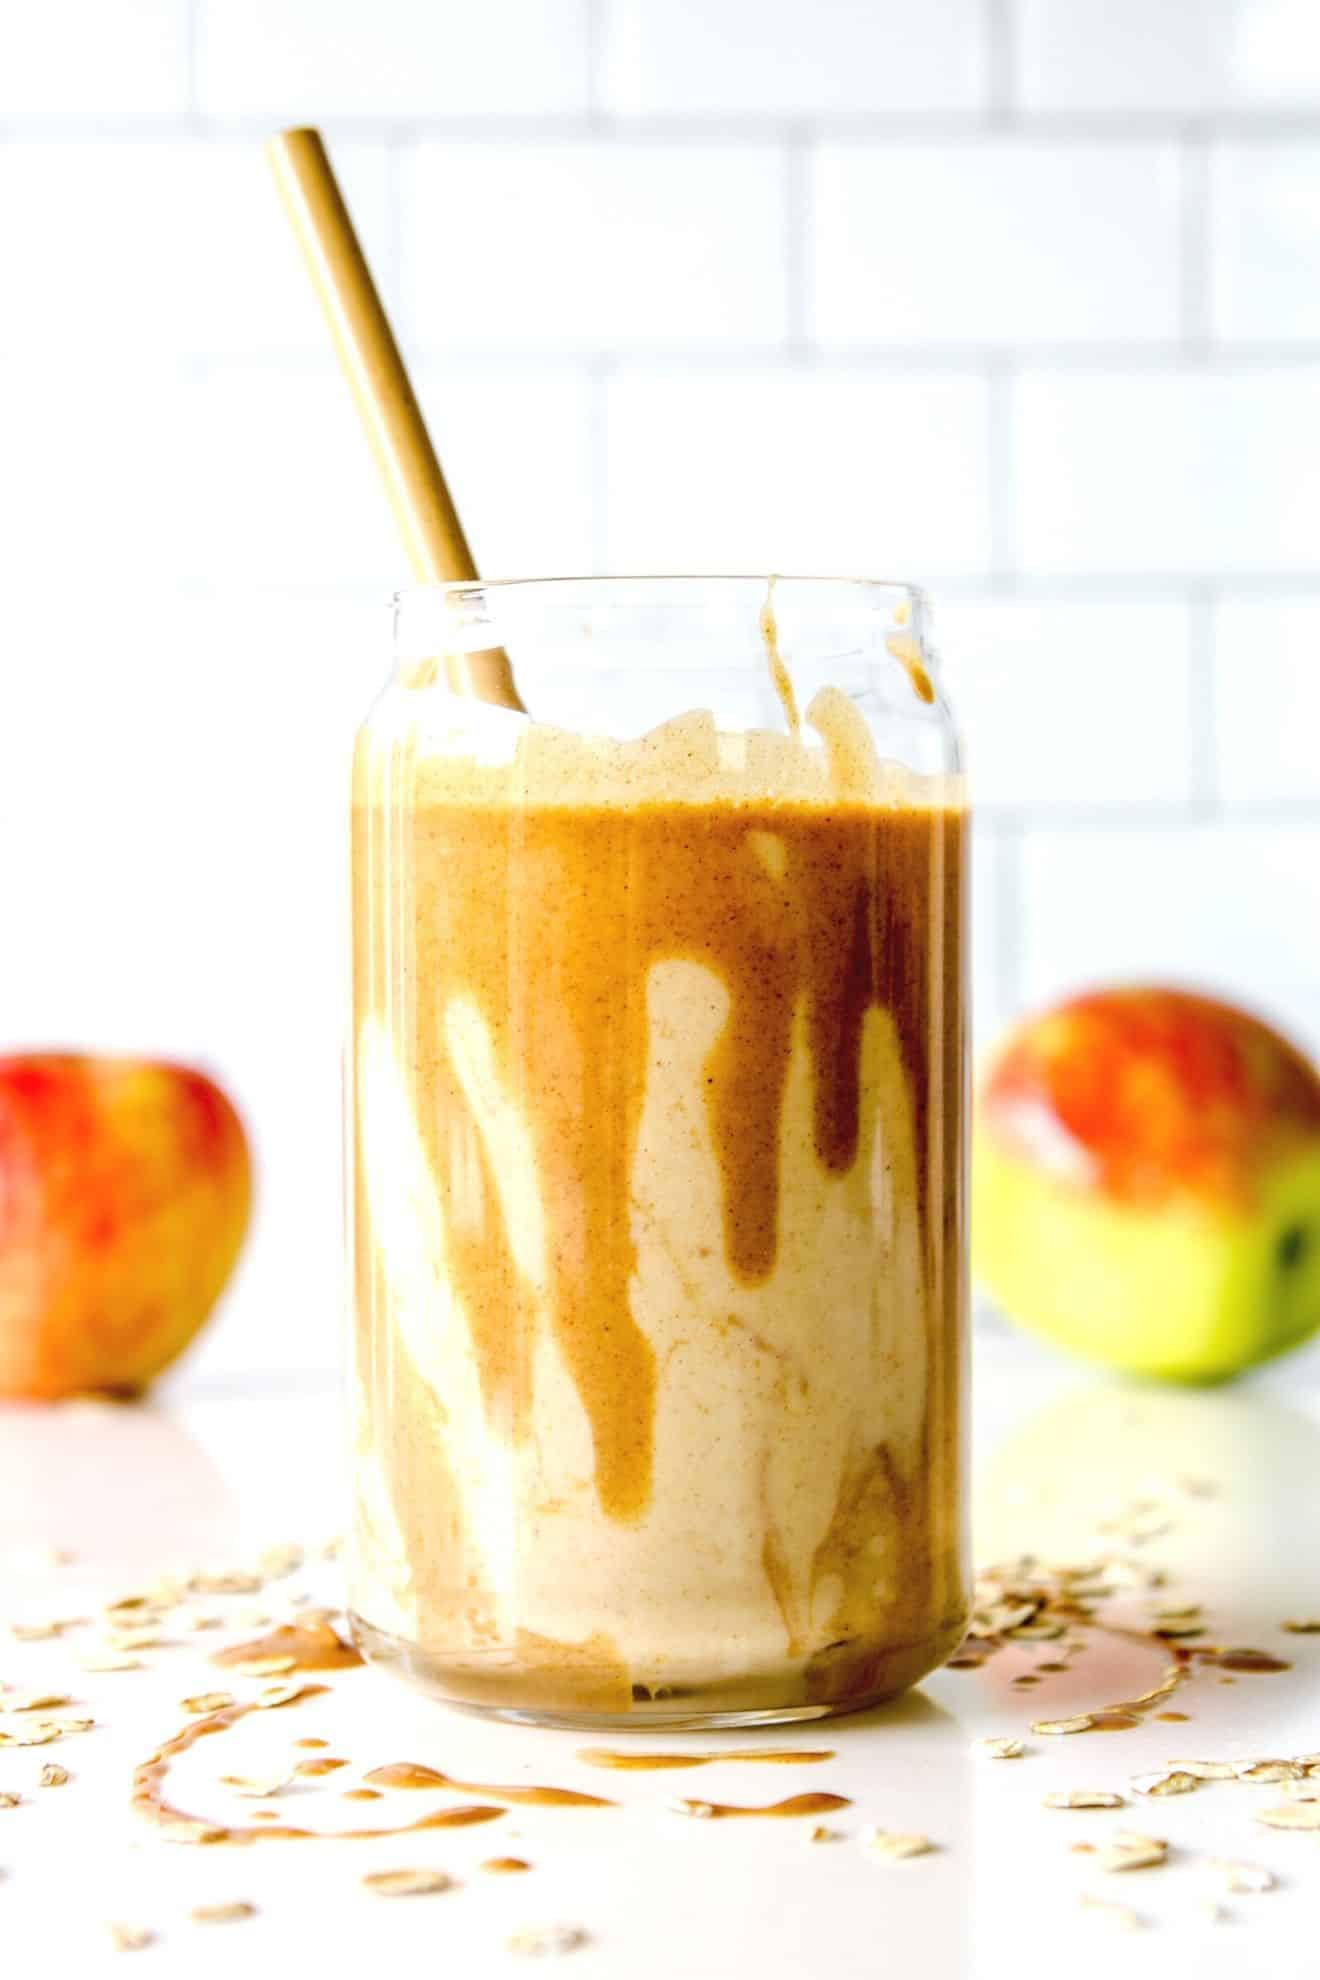 Easy 5-Minute Apple Banana Smoothie